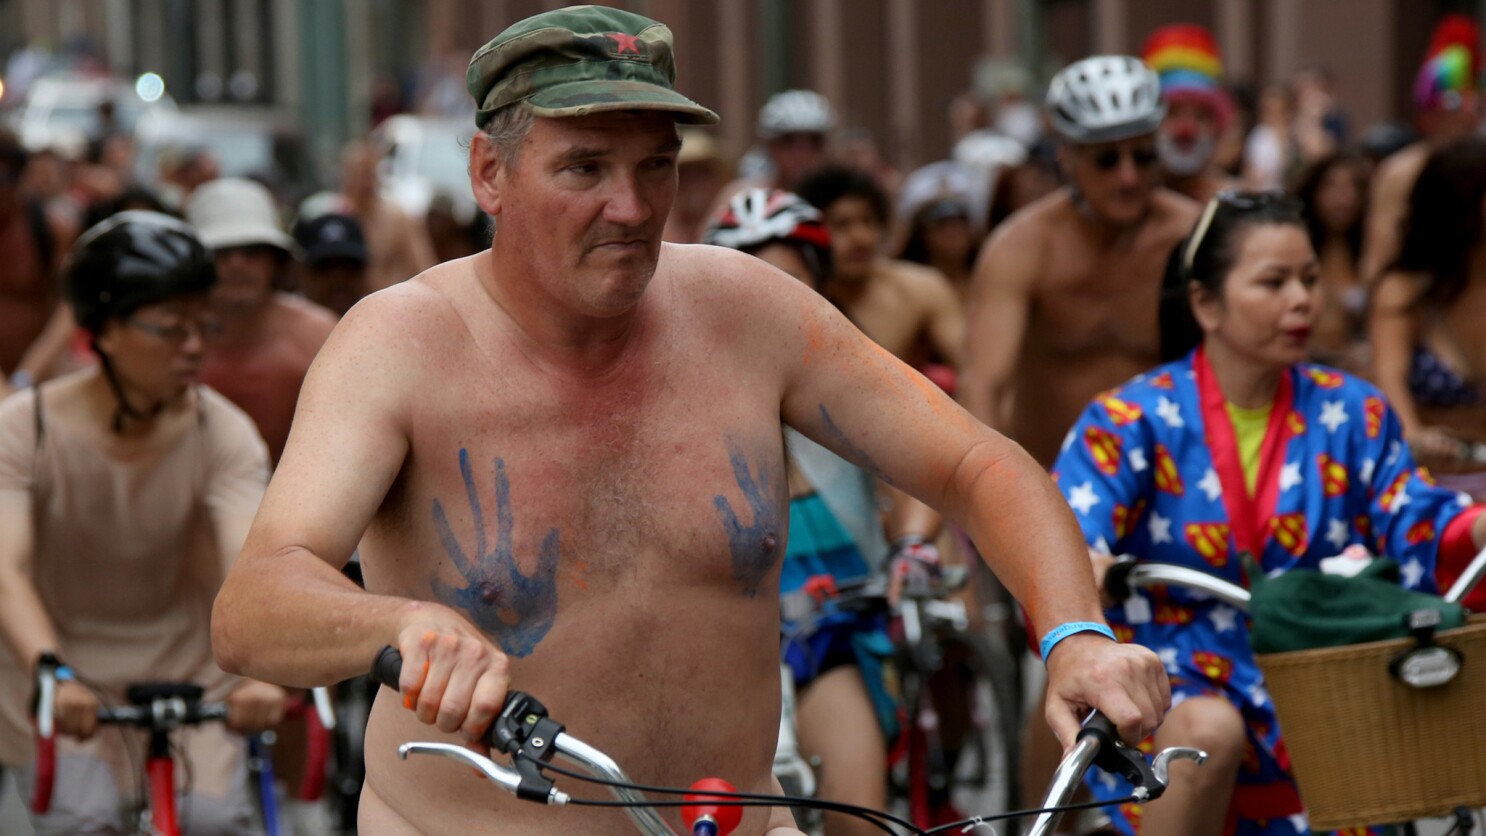 Cyclists bare all in downtown L.A. for World Naked Bike Ride - Los Angeles  Times